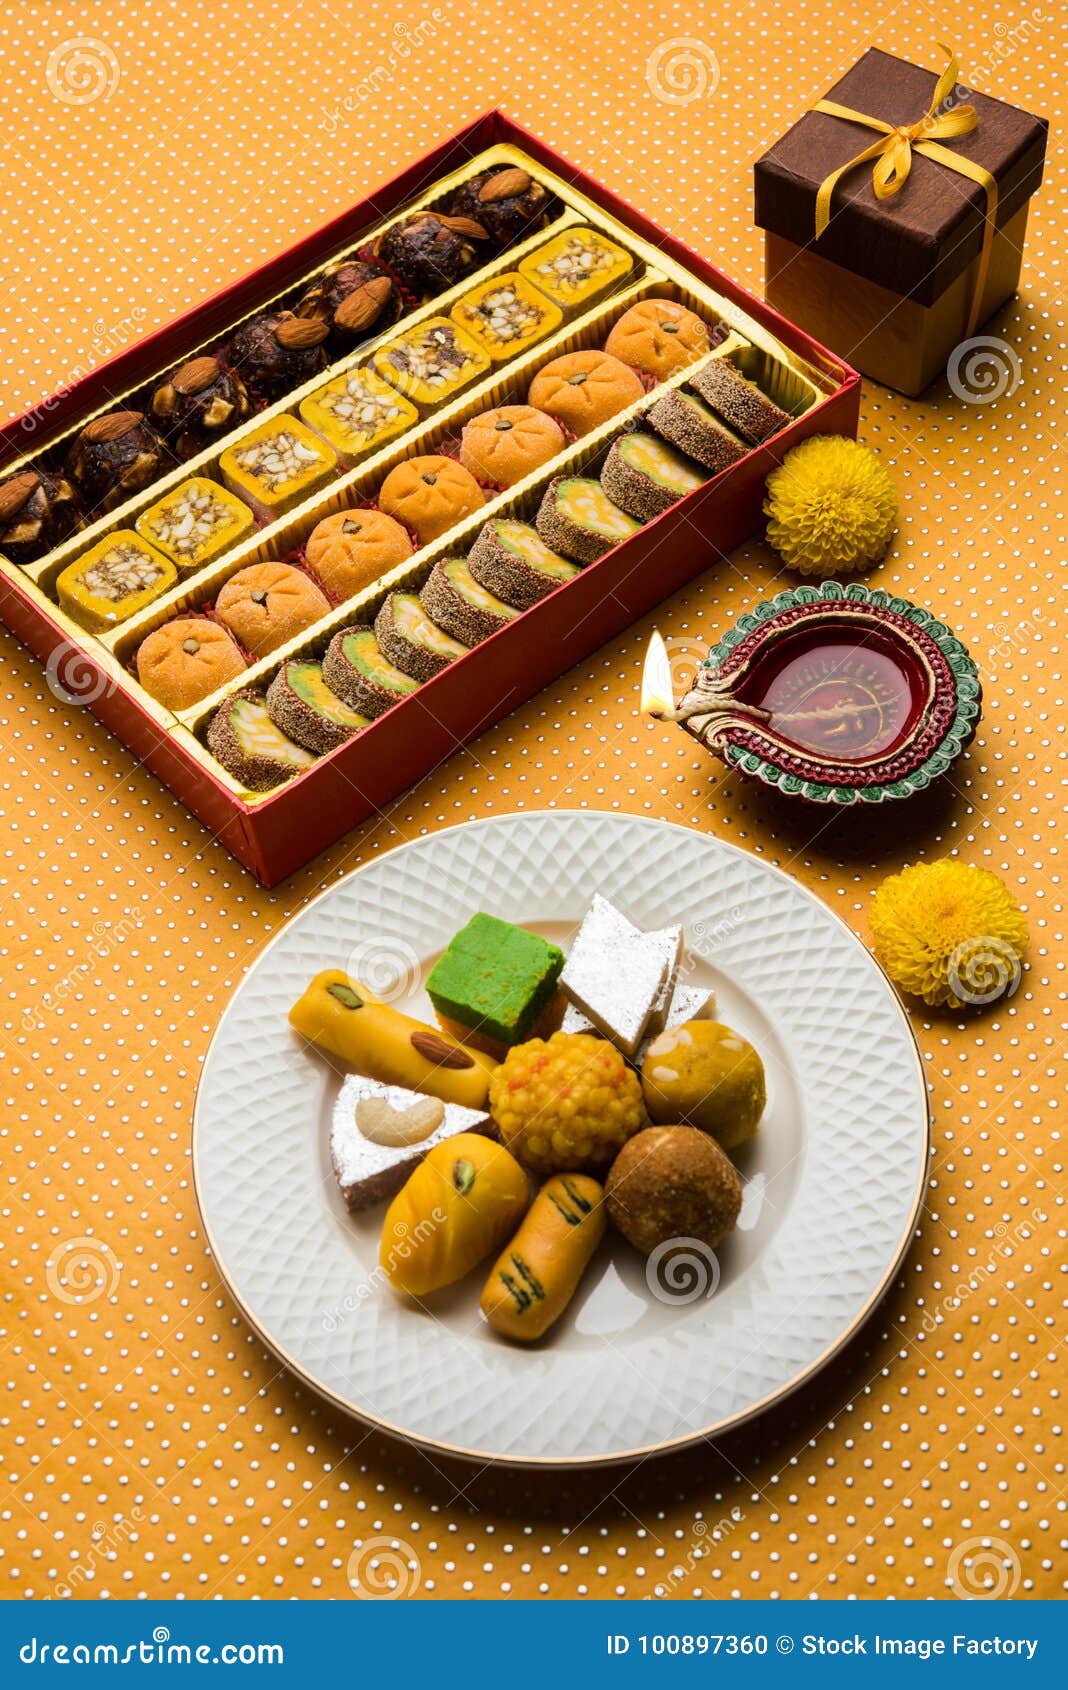 Indian sweets or Mithai for diwali festival with oil lamp or diya and gift box. Stock photo of Indian sweet or mithai and oil lamp or diya with gift box and flowers on decorative or colourful background, selective focus